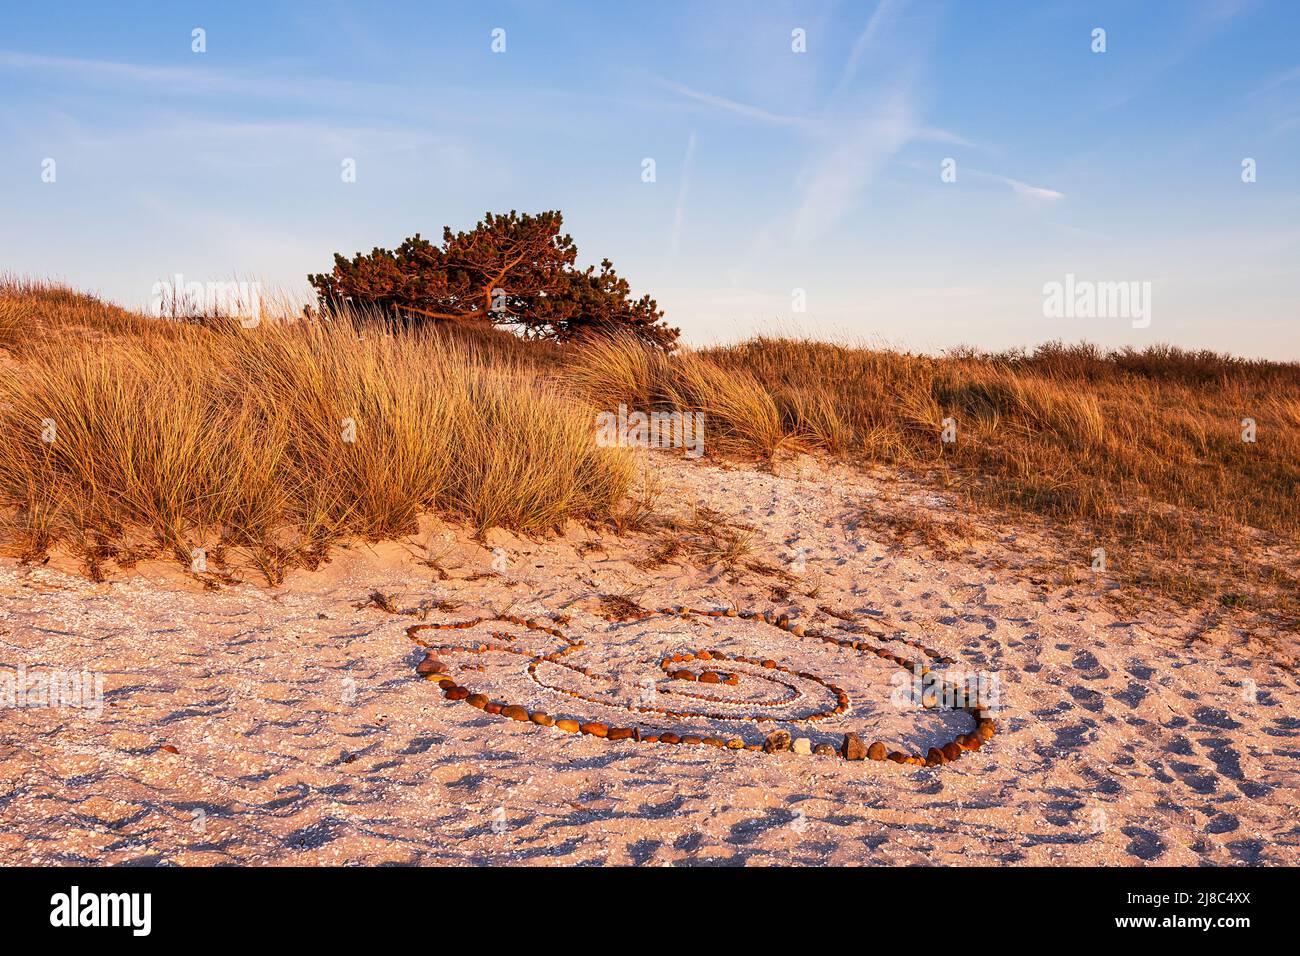 Beach in Kloster on the island Hiddensee, Germany. Stock Photo